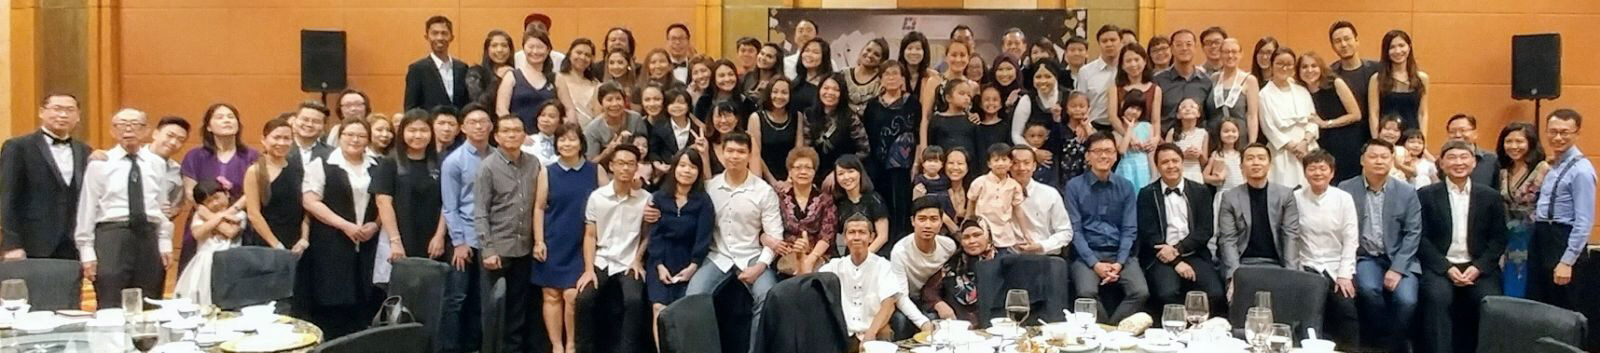 Specialist Dental Group Year End Dinner 2017